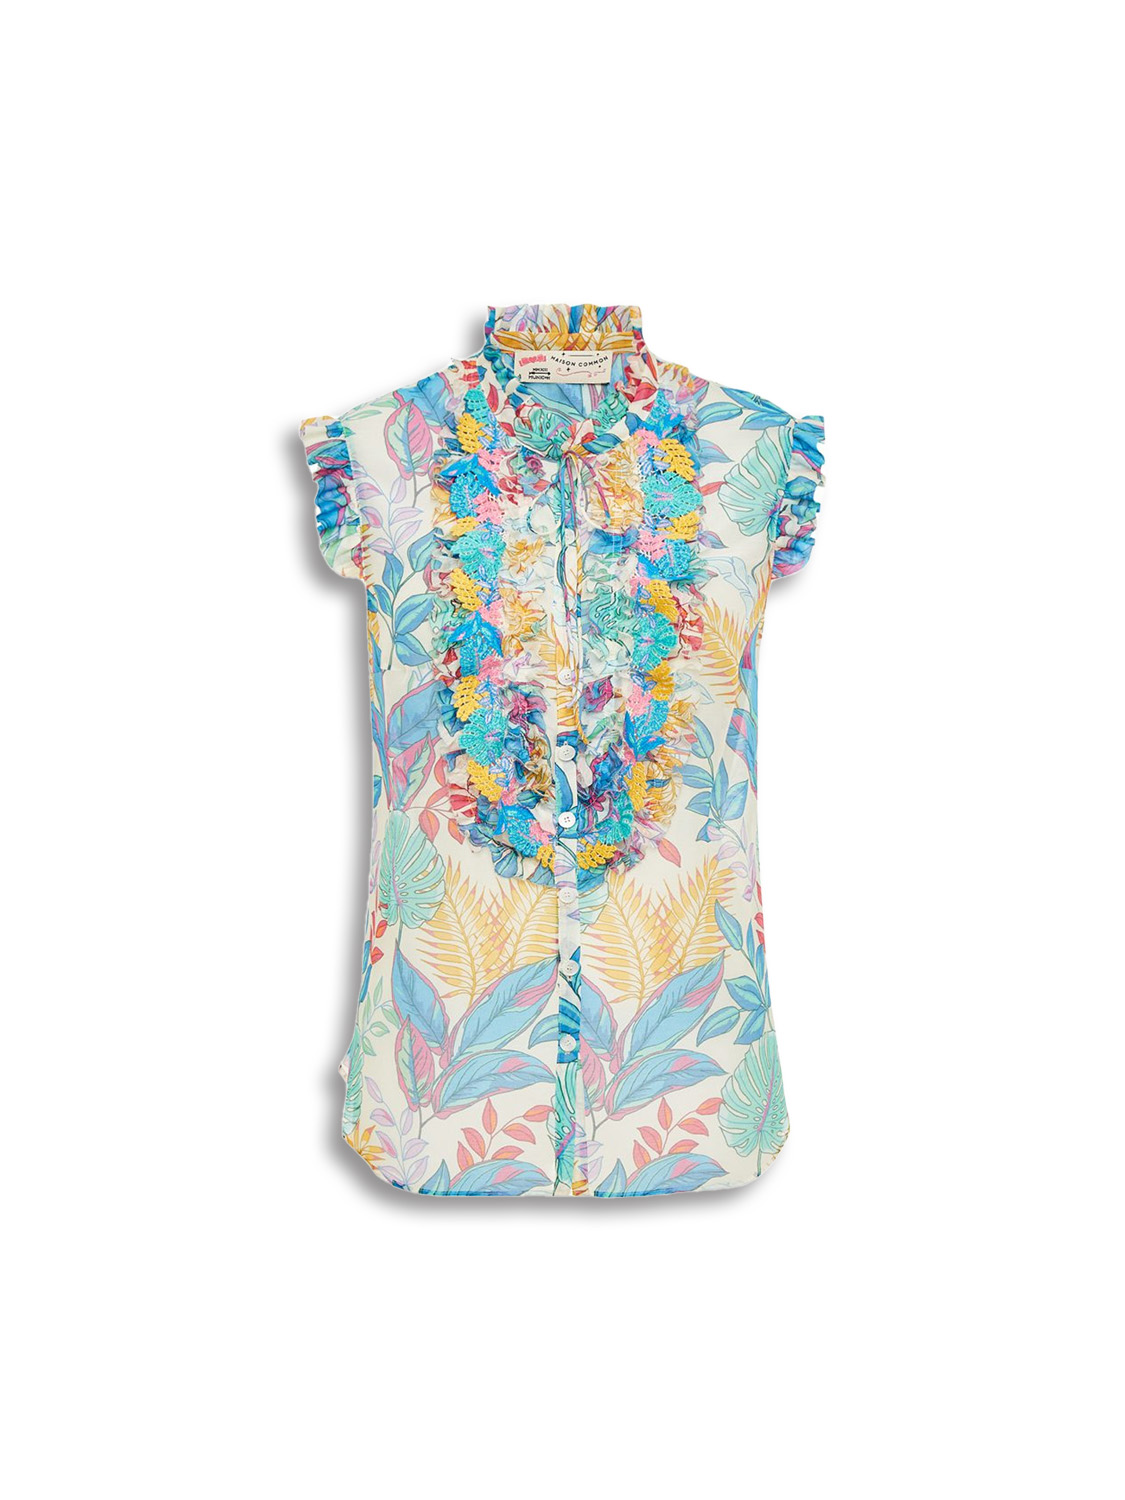 Sleeveless Tropical Top with Ruffle Details - Blouse with colorful pattern print